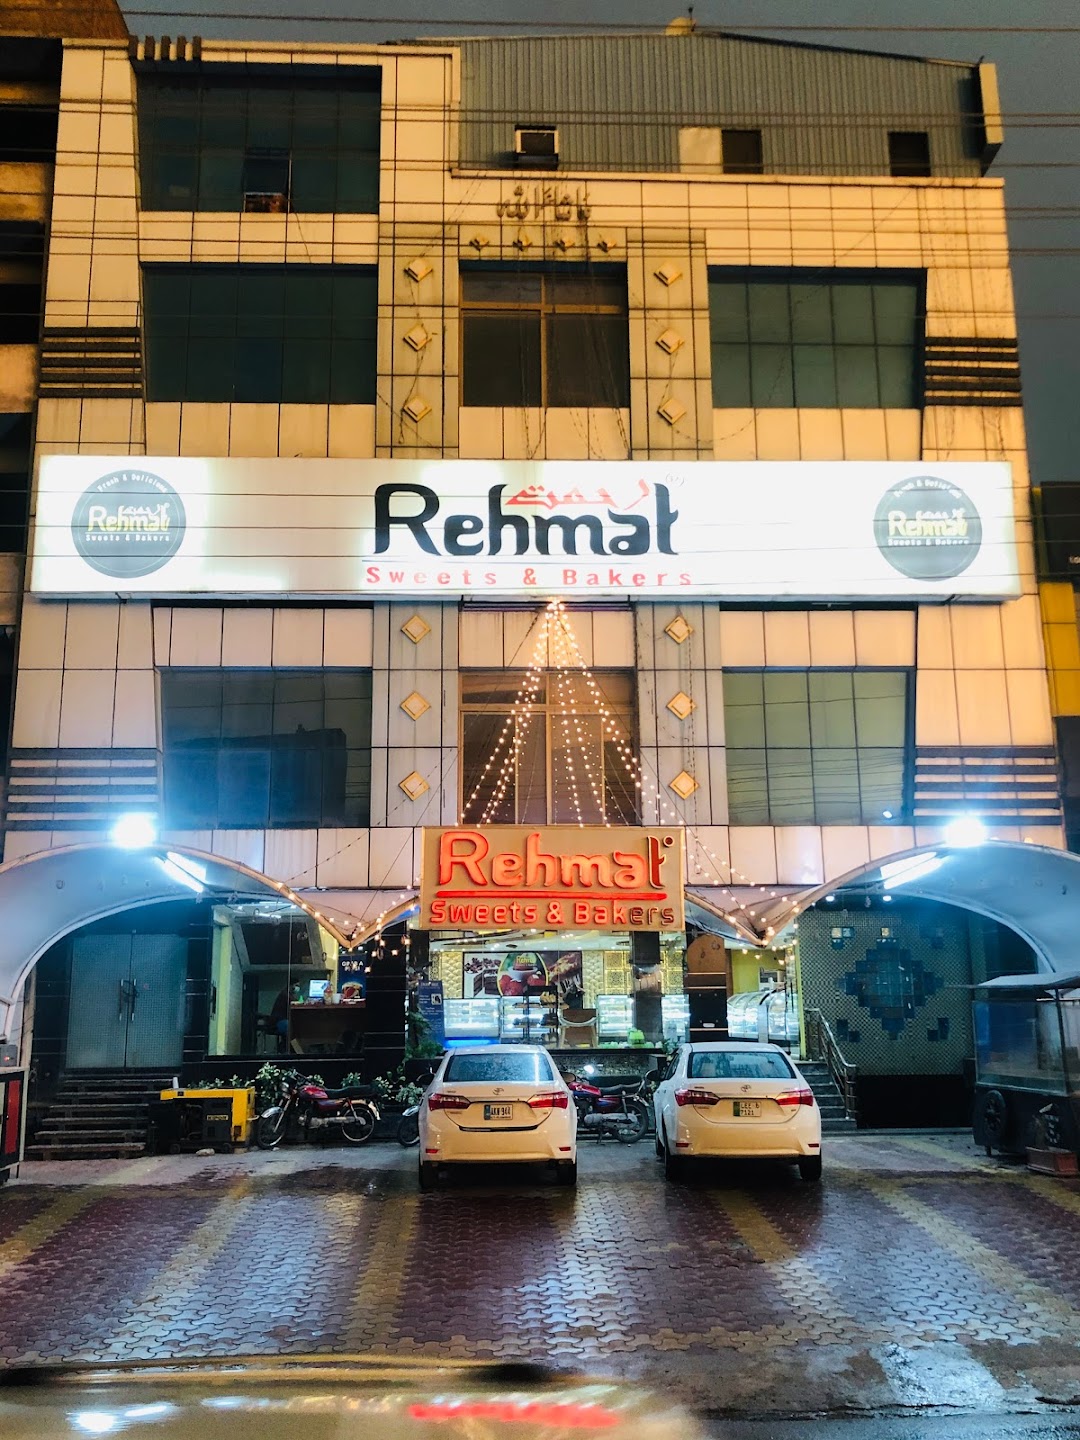 Rehmat Sweets and Bakers